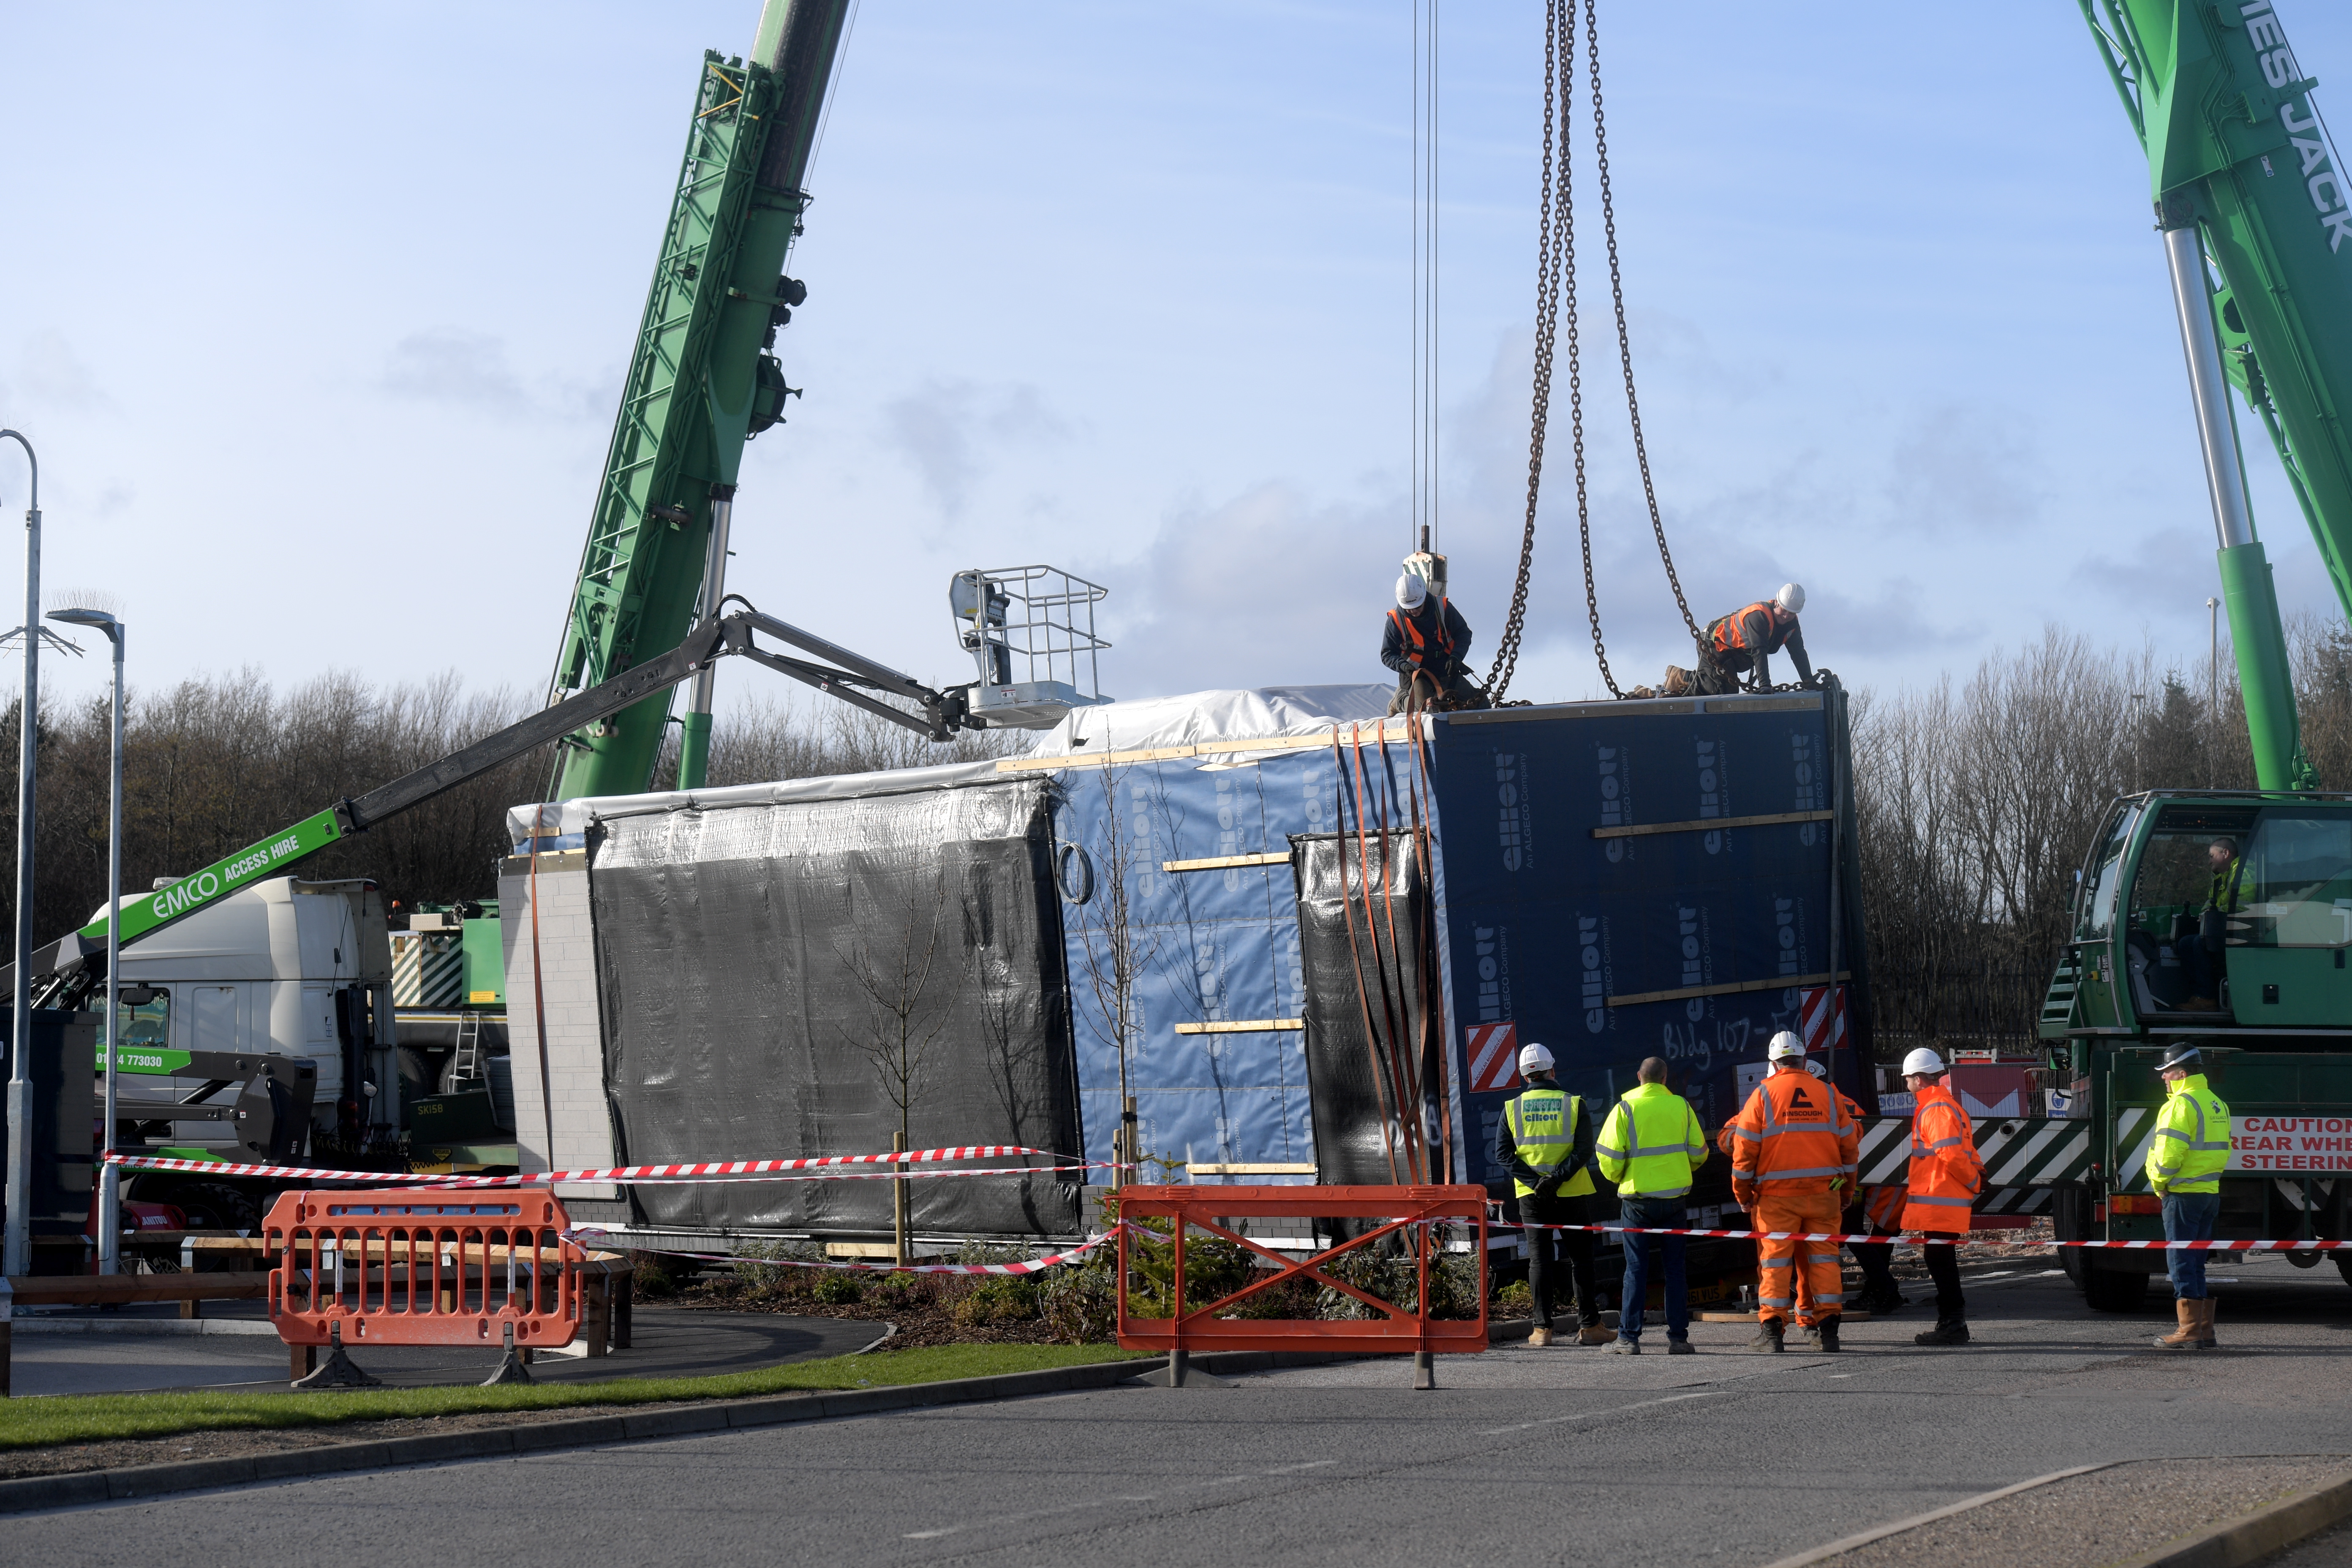 A lorry delivering material became stuck near Asda in Portlethen.
Picture by Kath Flannery.